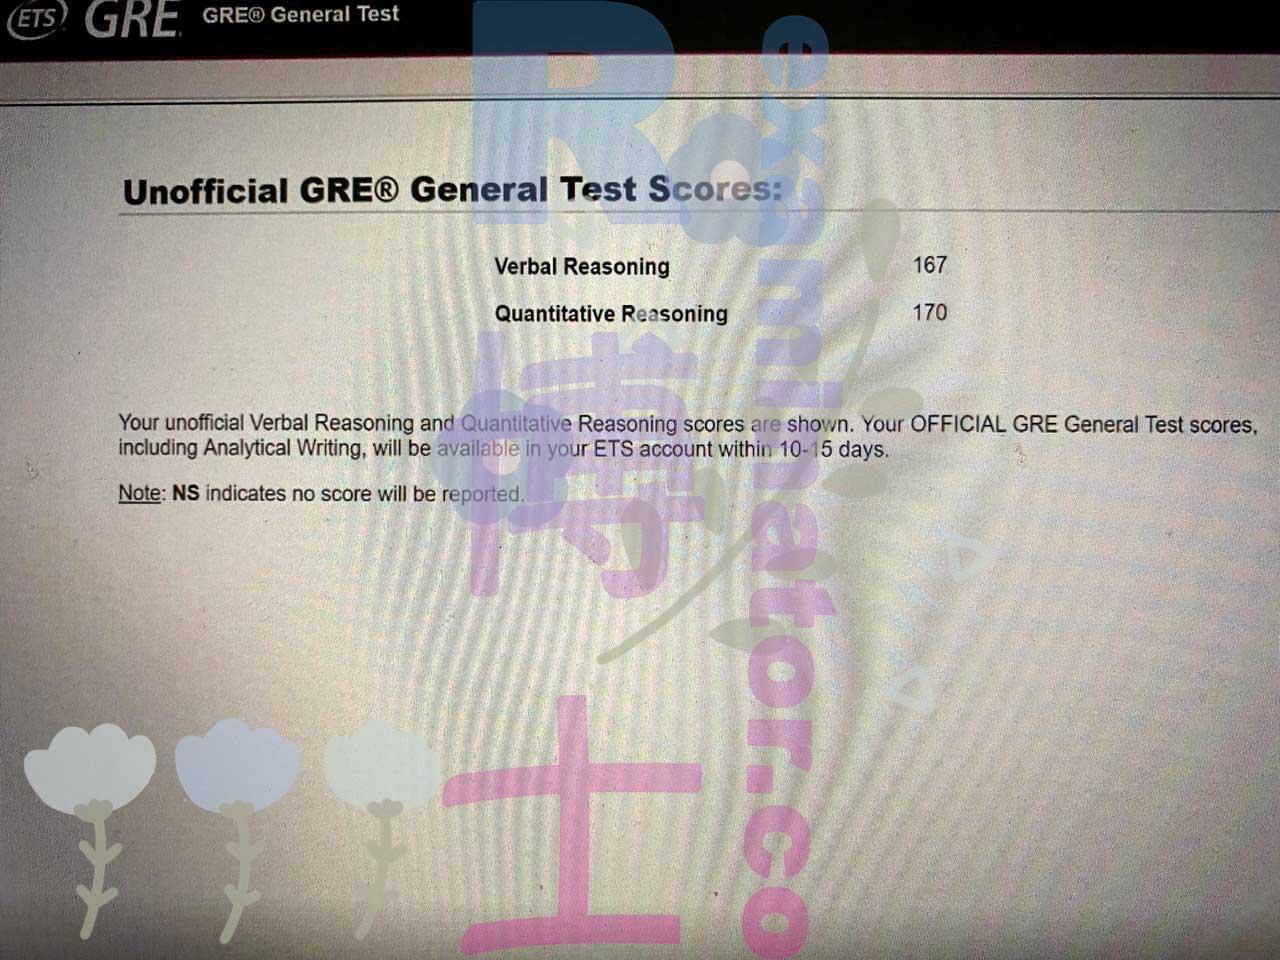 score image for GRE Cheating success story #339